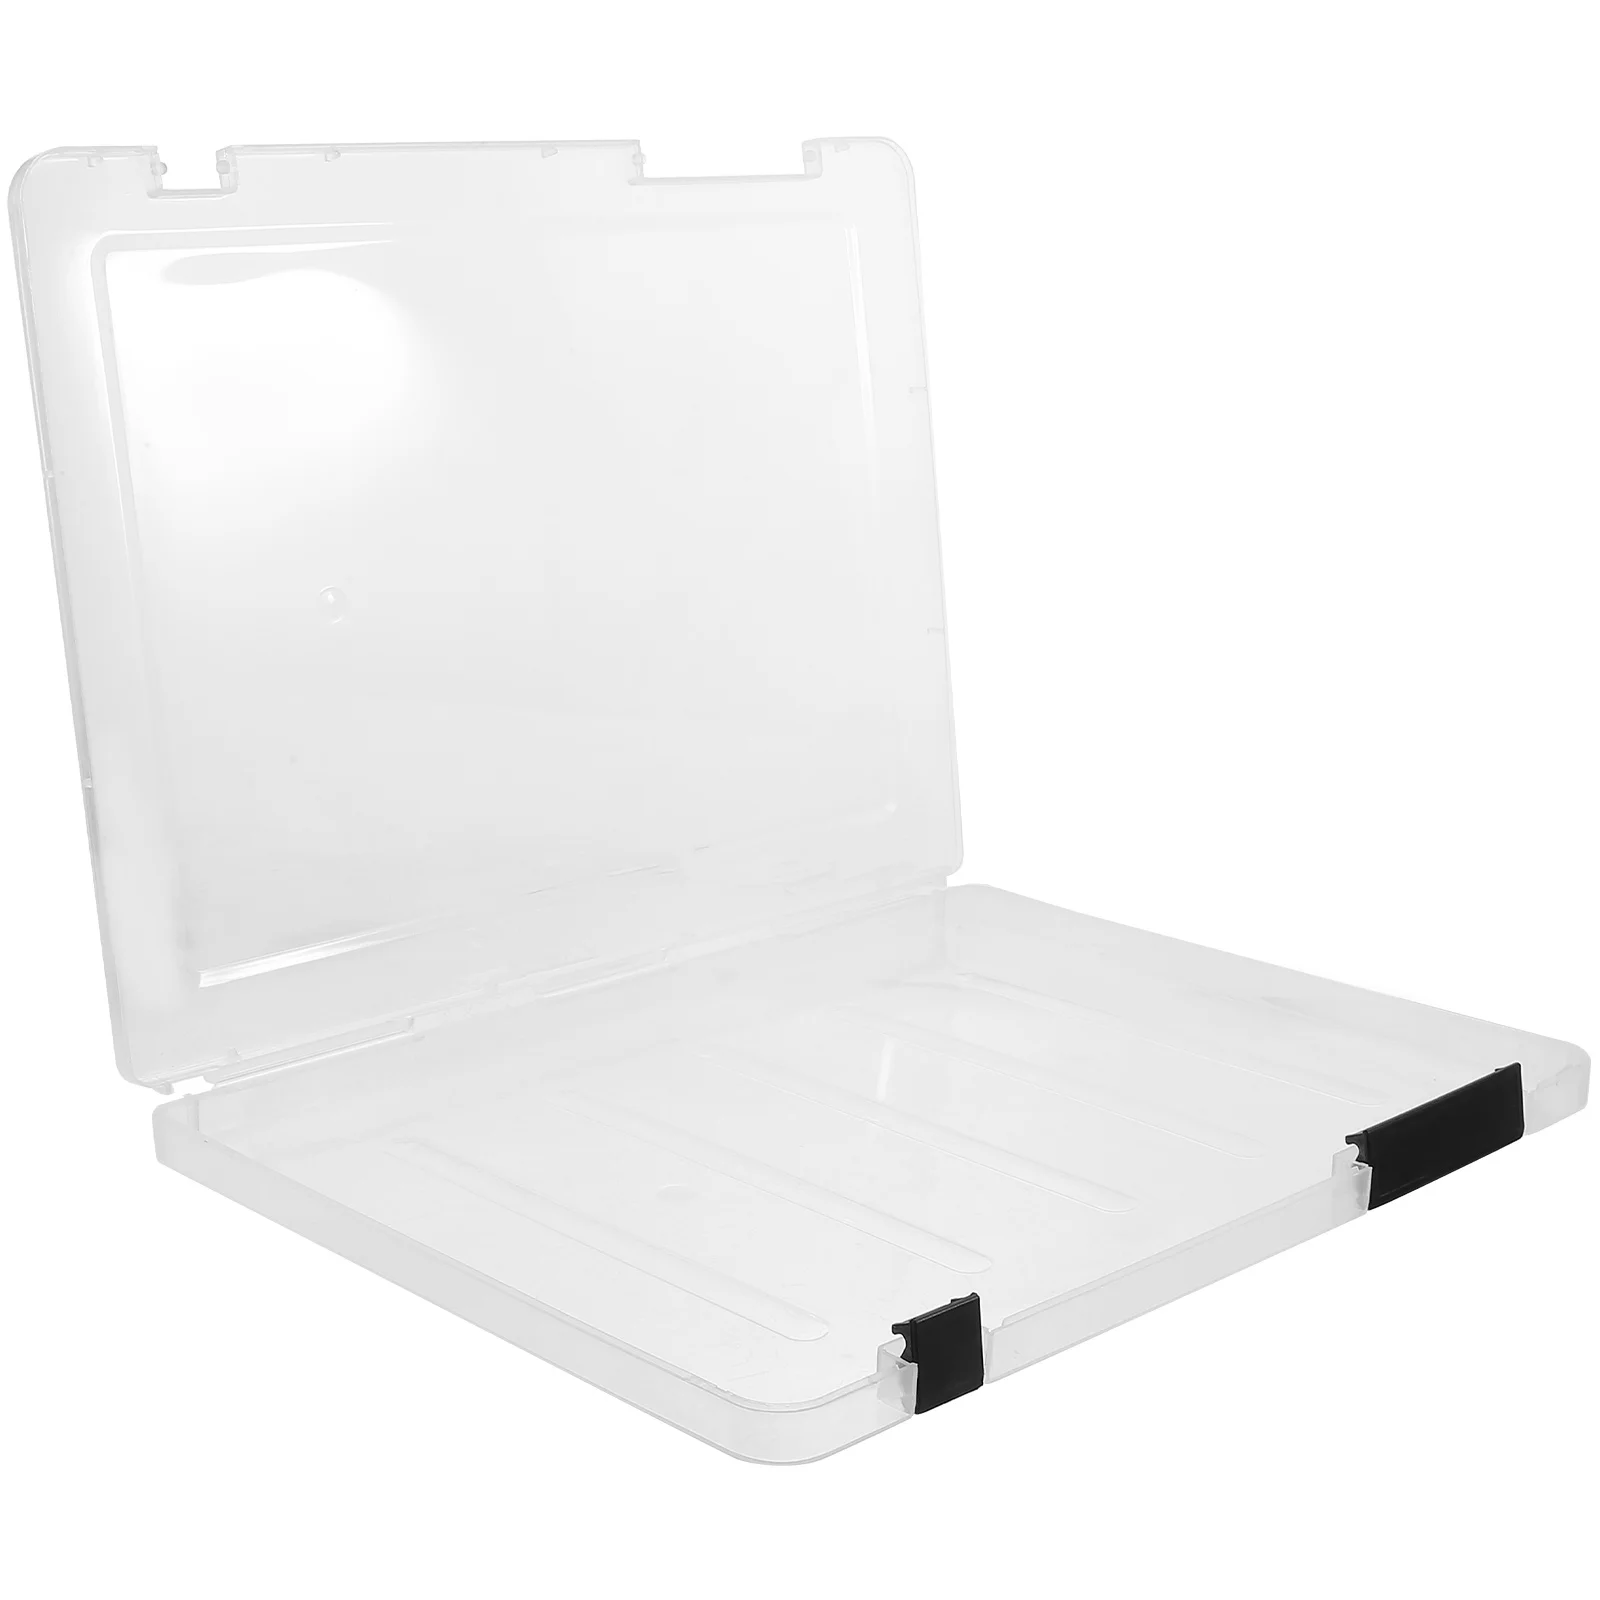 

Magazine Stand Document Protectors for Collectors Storage Protective Case Display Birth Certificate Holder Travel